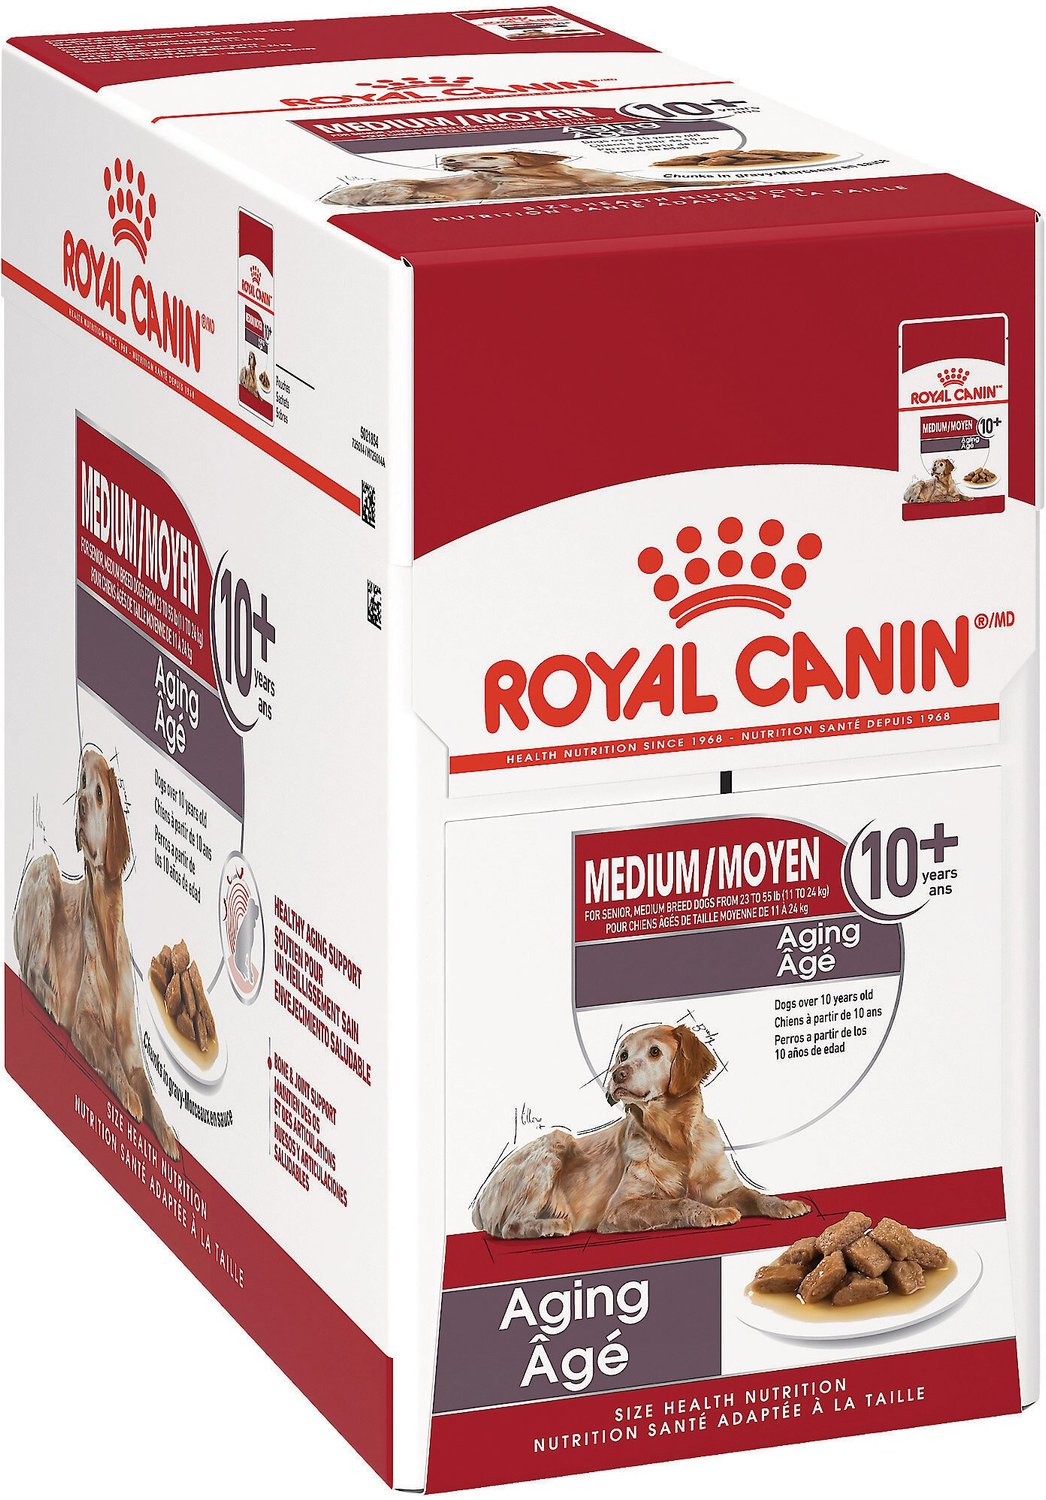 ROYAL CANIN Medium Aging Wet Food, 4.9-oz pouch, case of 10 - Chewy.com